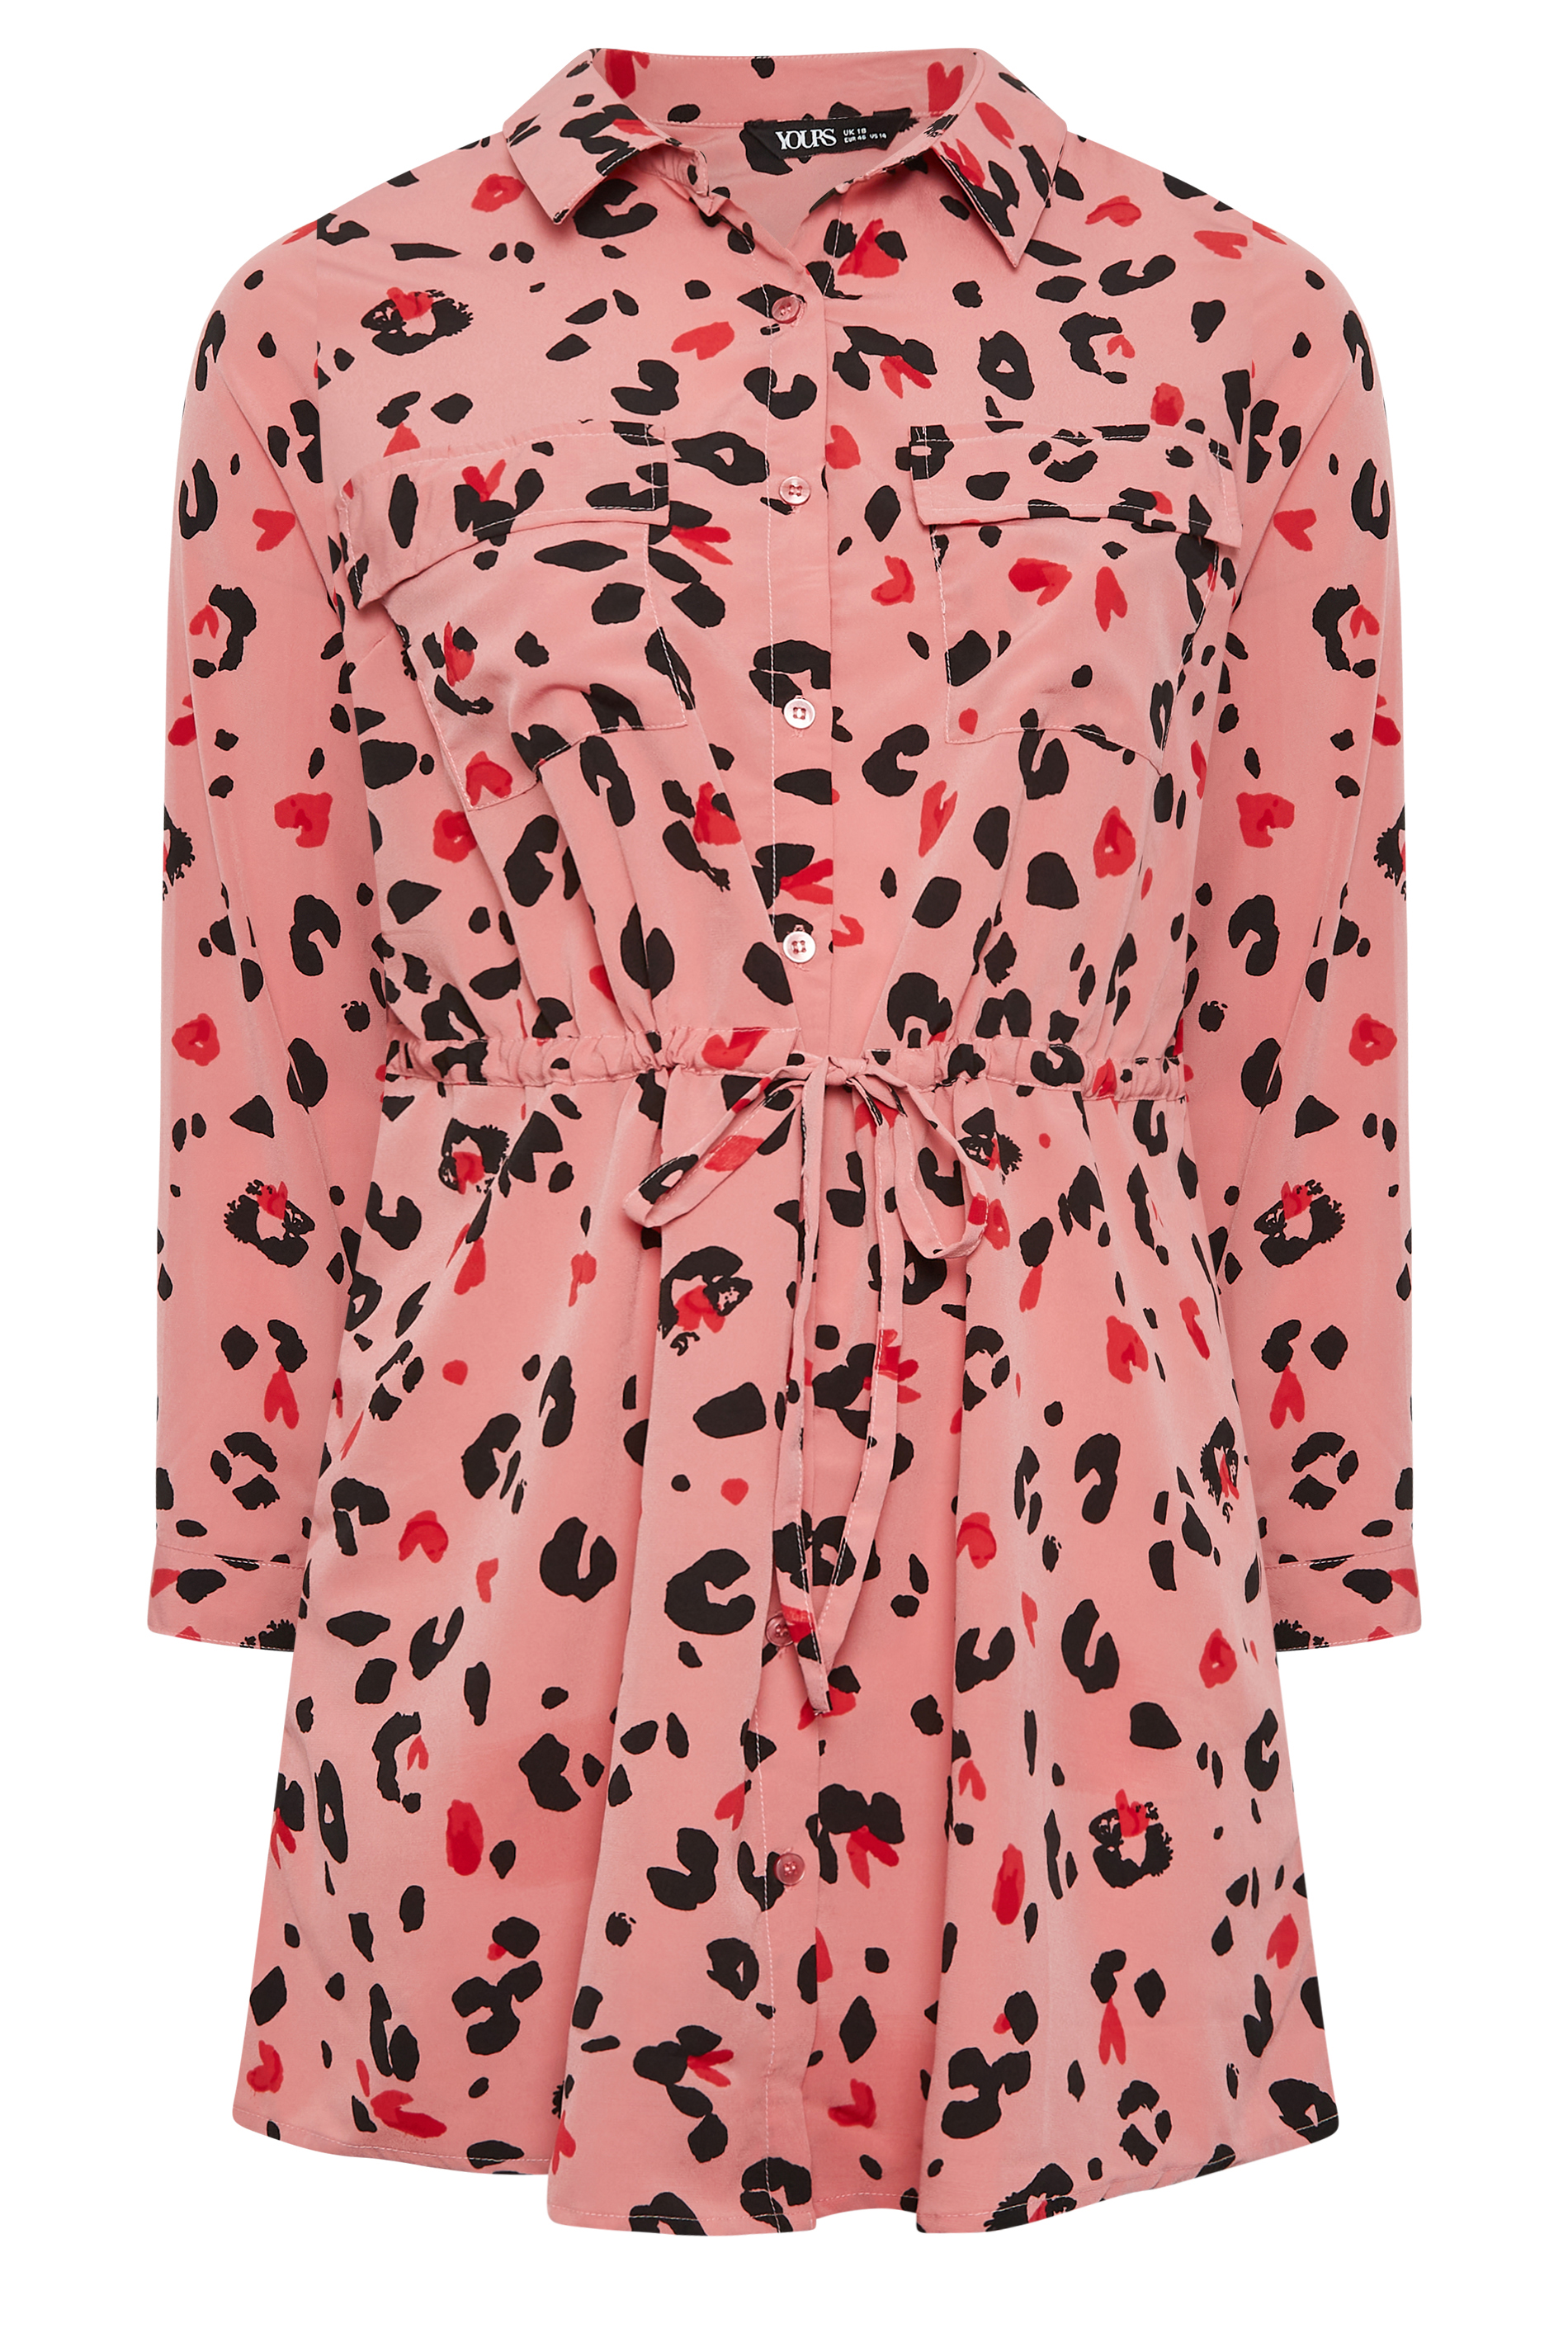 YOURS Curve Black Floral Tunic Shirt